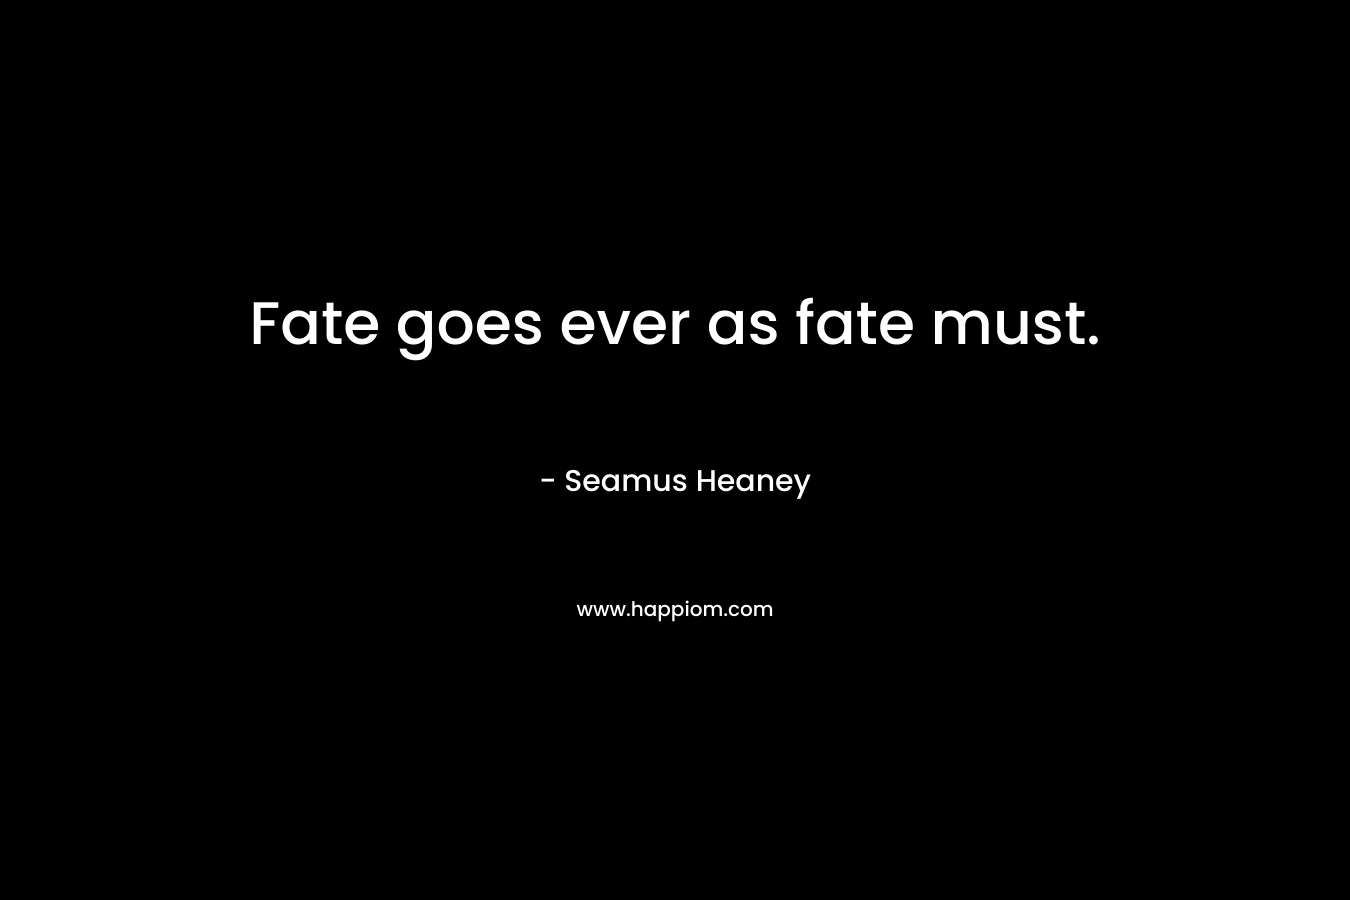 Fate goes ever as fate must. – Seamus Heaney